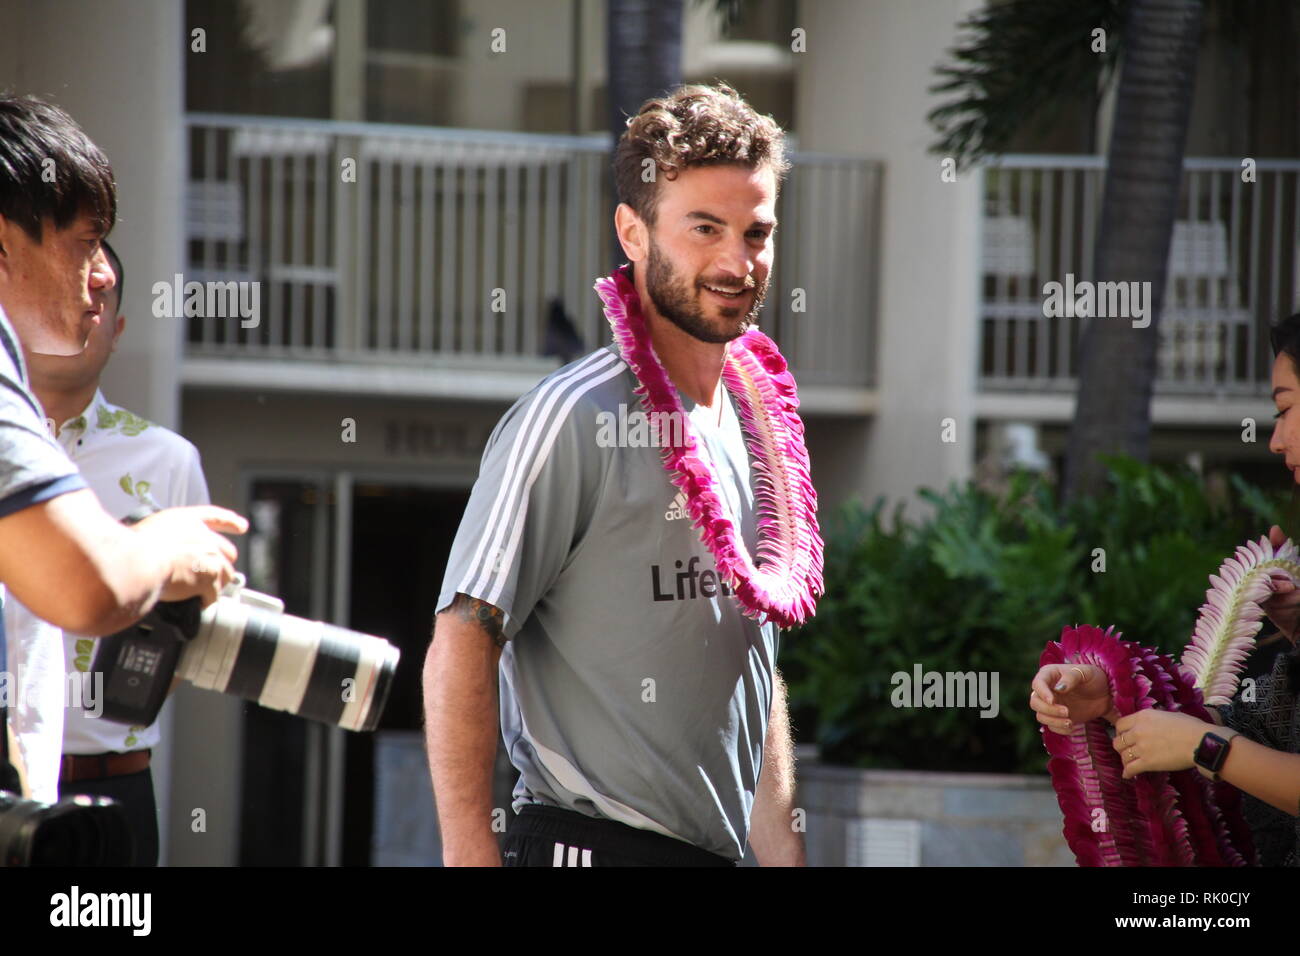 February 7, 2019 - Real Salt Lake midfielder Kyle Beckerman #5 during the Pacific Rim Cup press conference at the Embassy Suites Waikiki in Honolulu, HI - Michael Sullivan/CSM Stock Photo